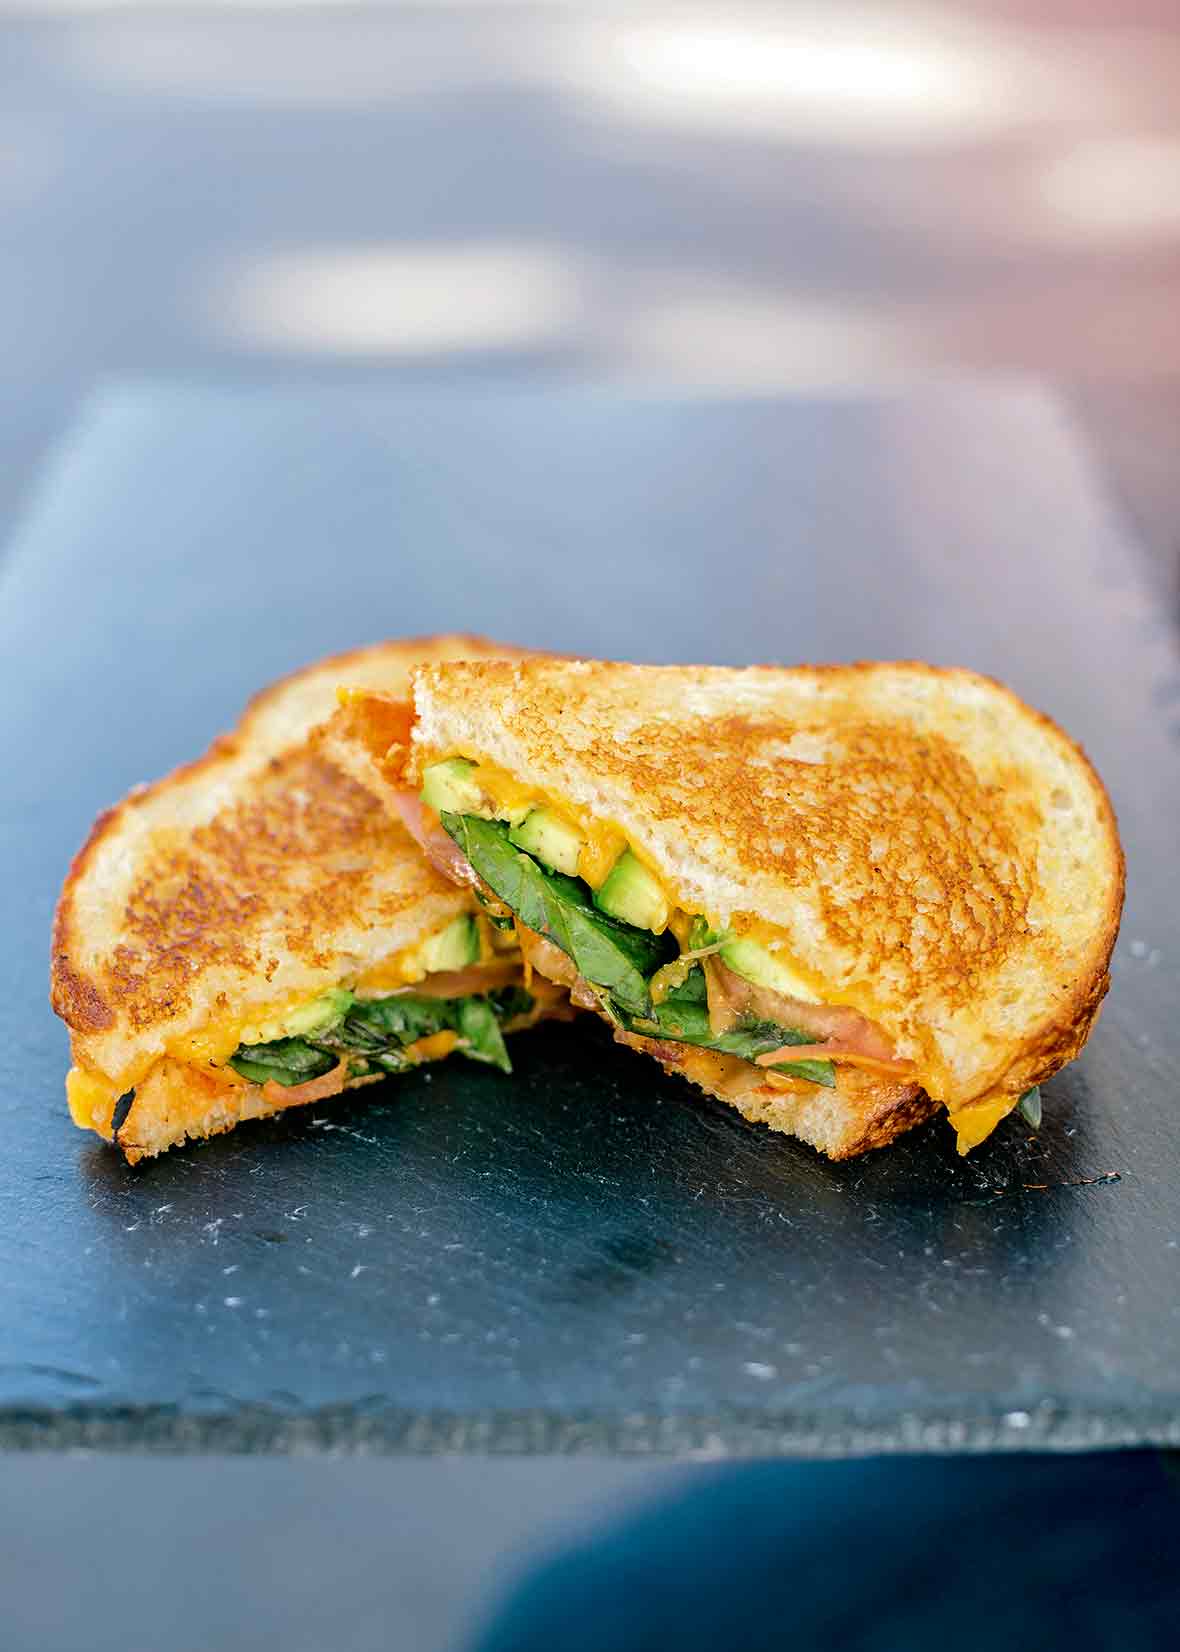 Intrekking Of later Bont Veggie Grilled Cheese Sandwich | Leite's Culinaria